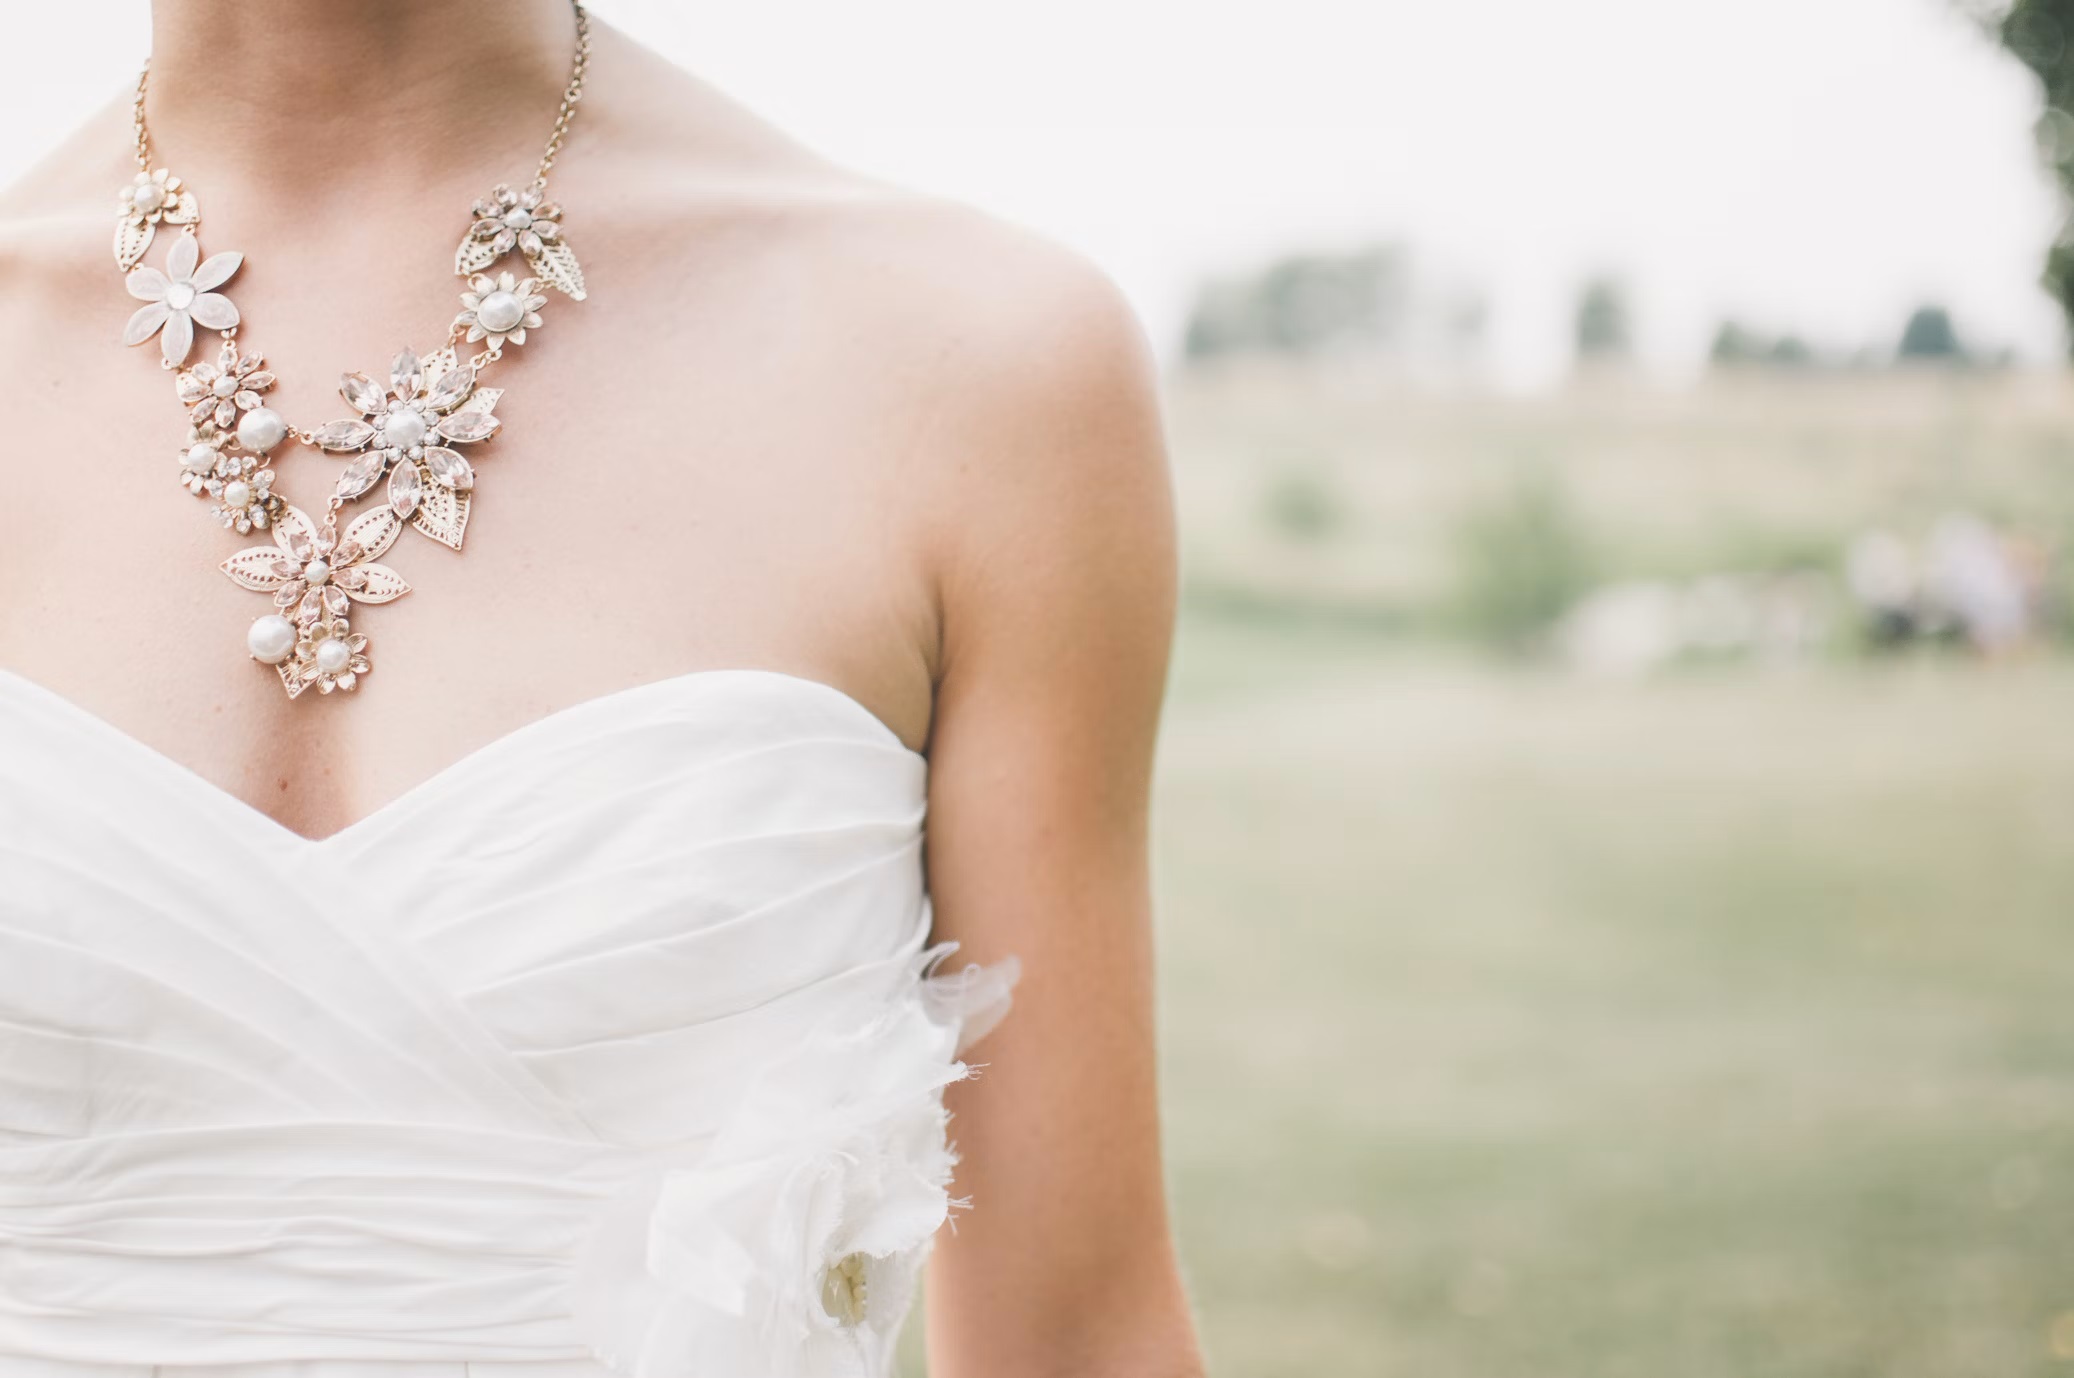 Bridal Bliss: Incorporating Mother of Pearl into Wedding Jewelry